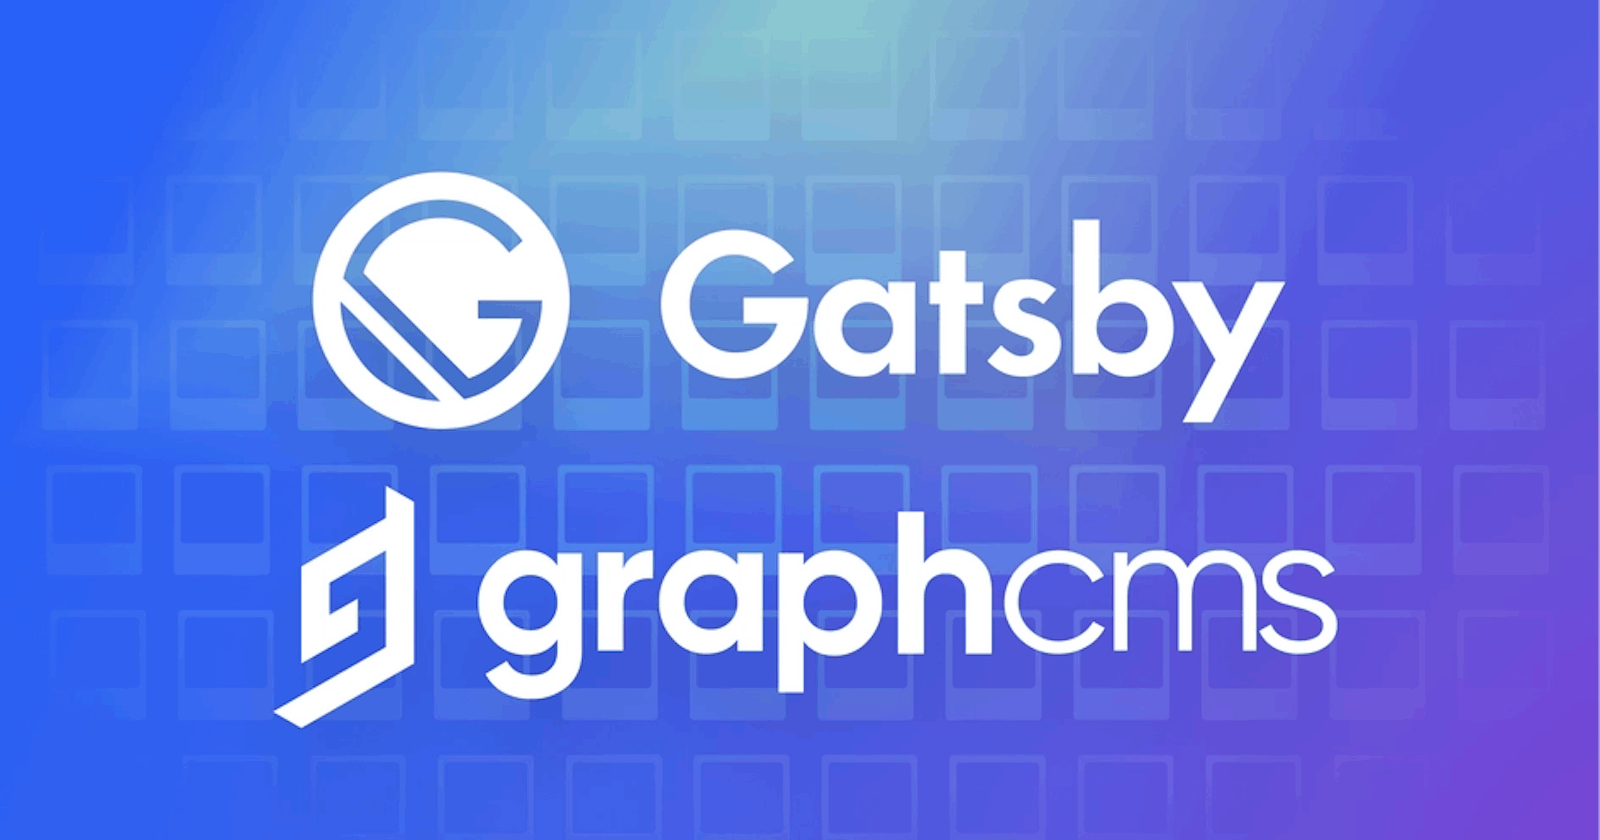 Building a photo gallery app with Gatsby and GraphCMS